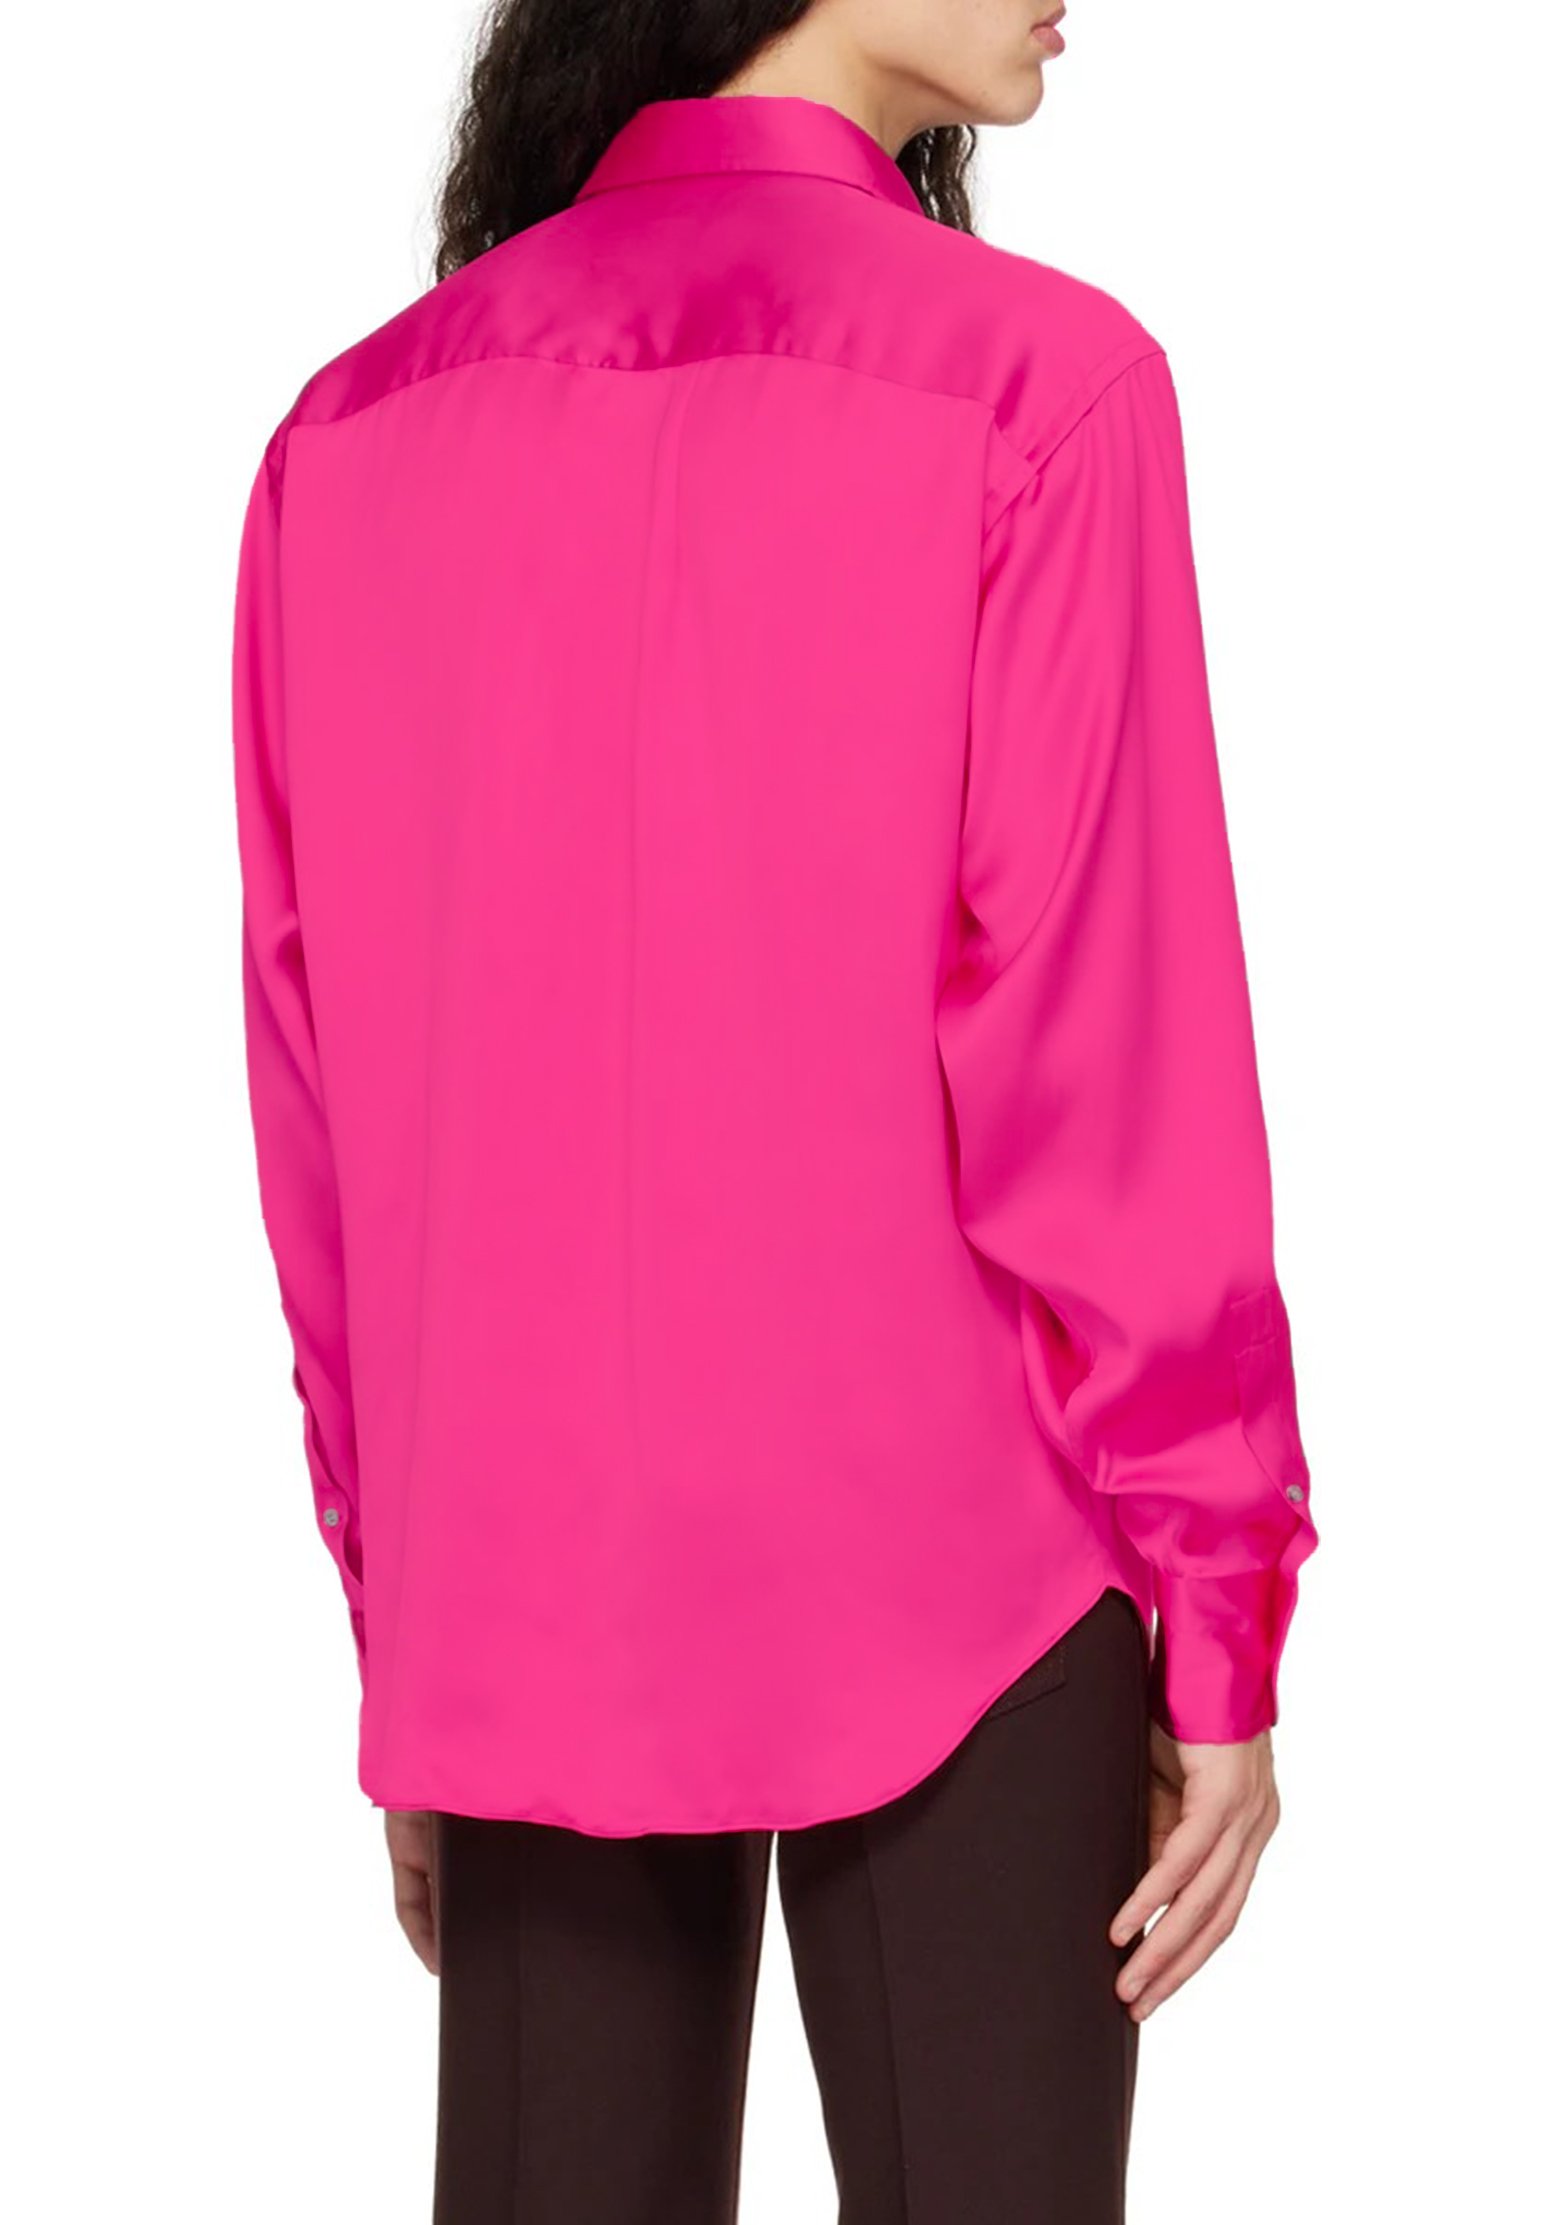 Shirt TOM FORD Color: pink (Code: 1421) in online store Allure